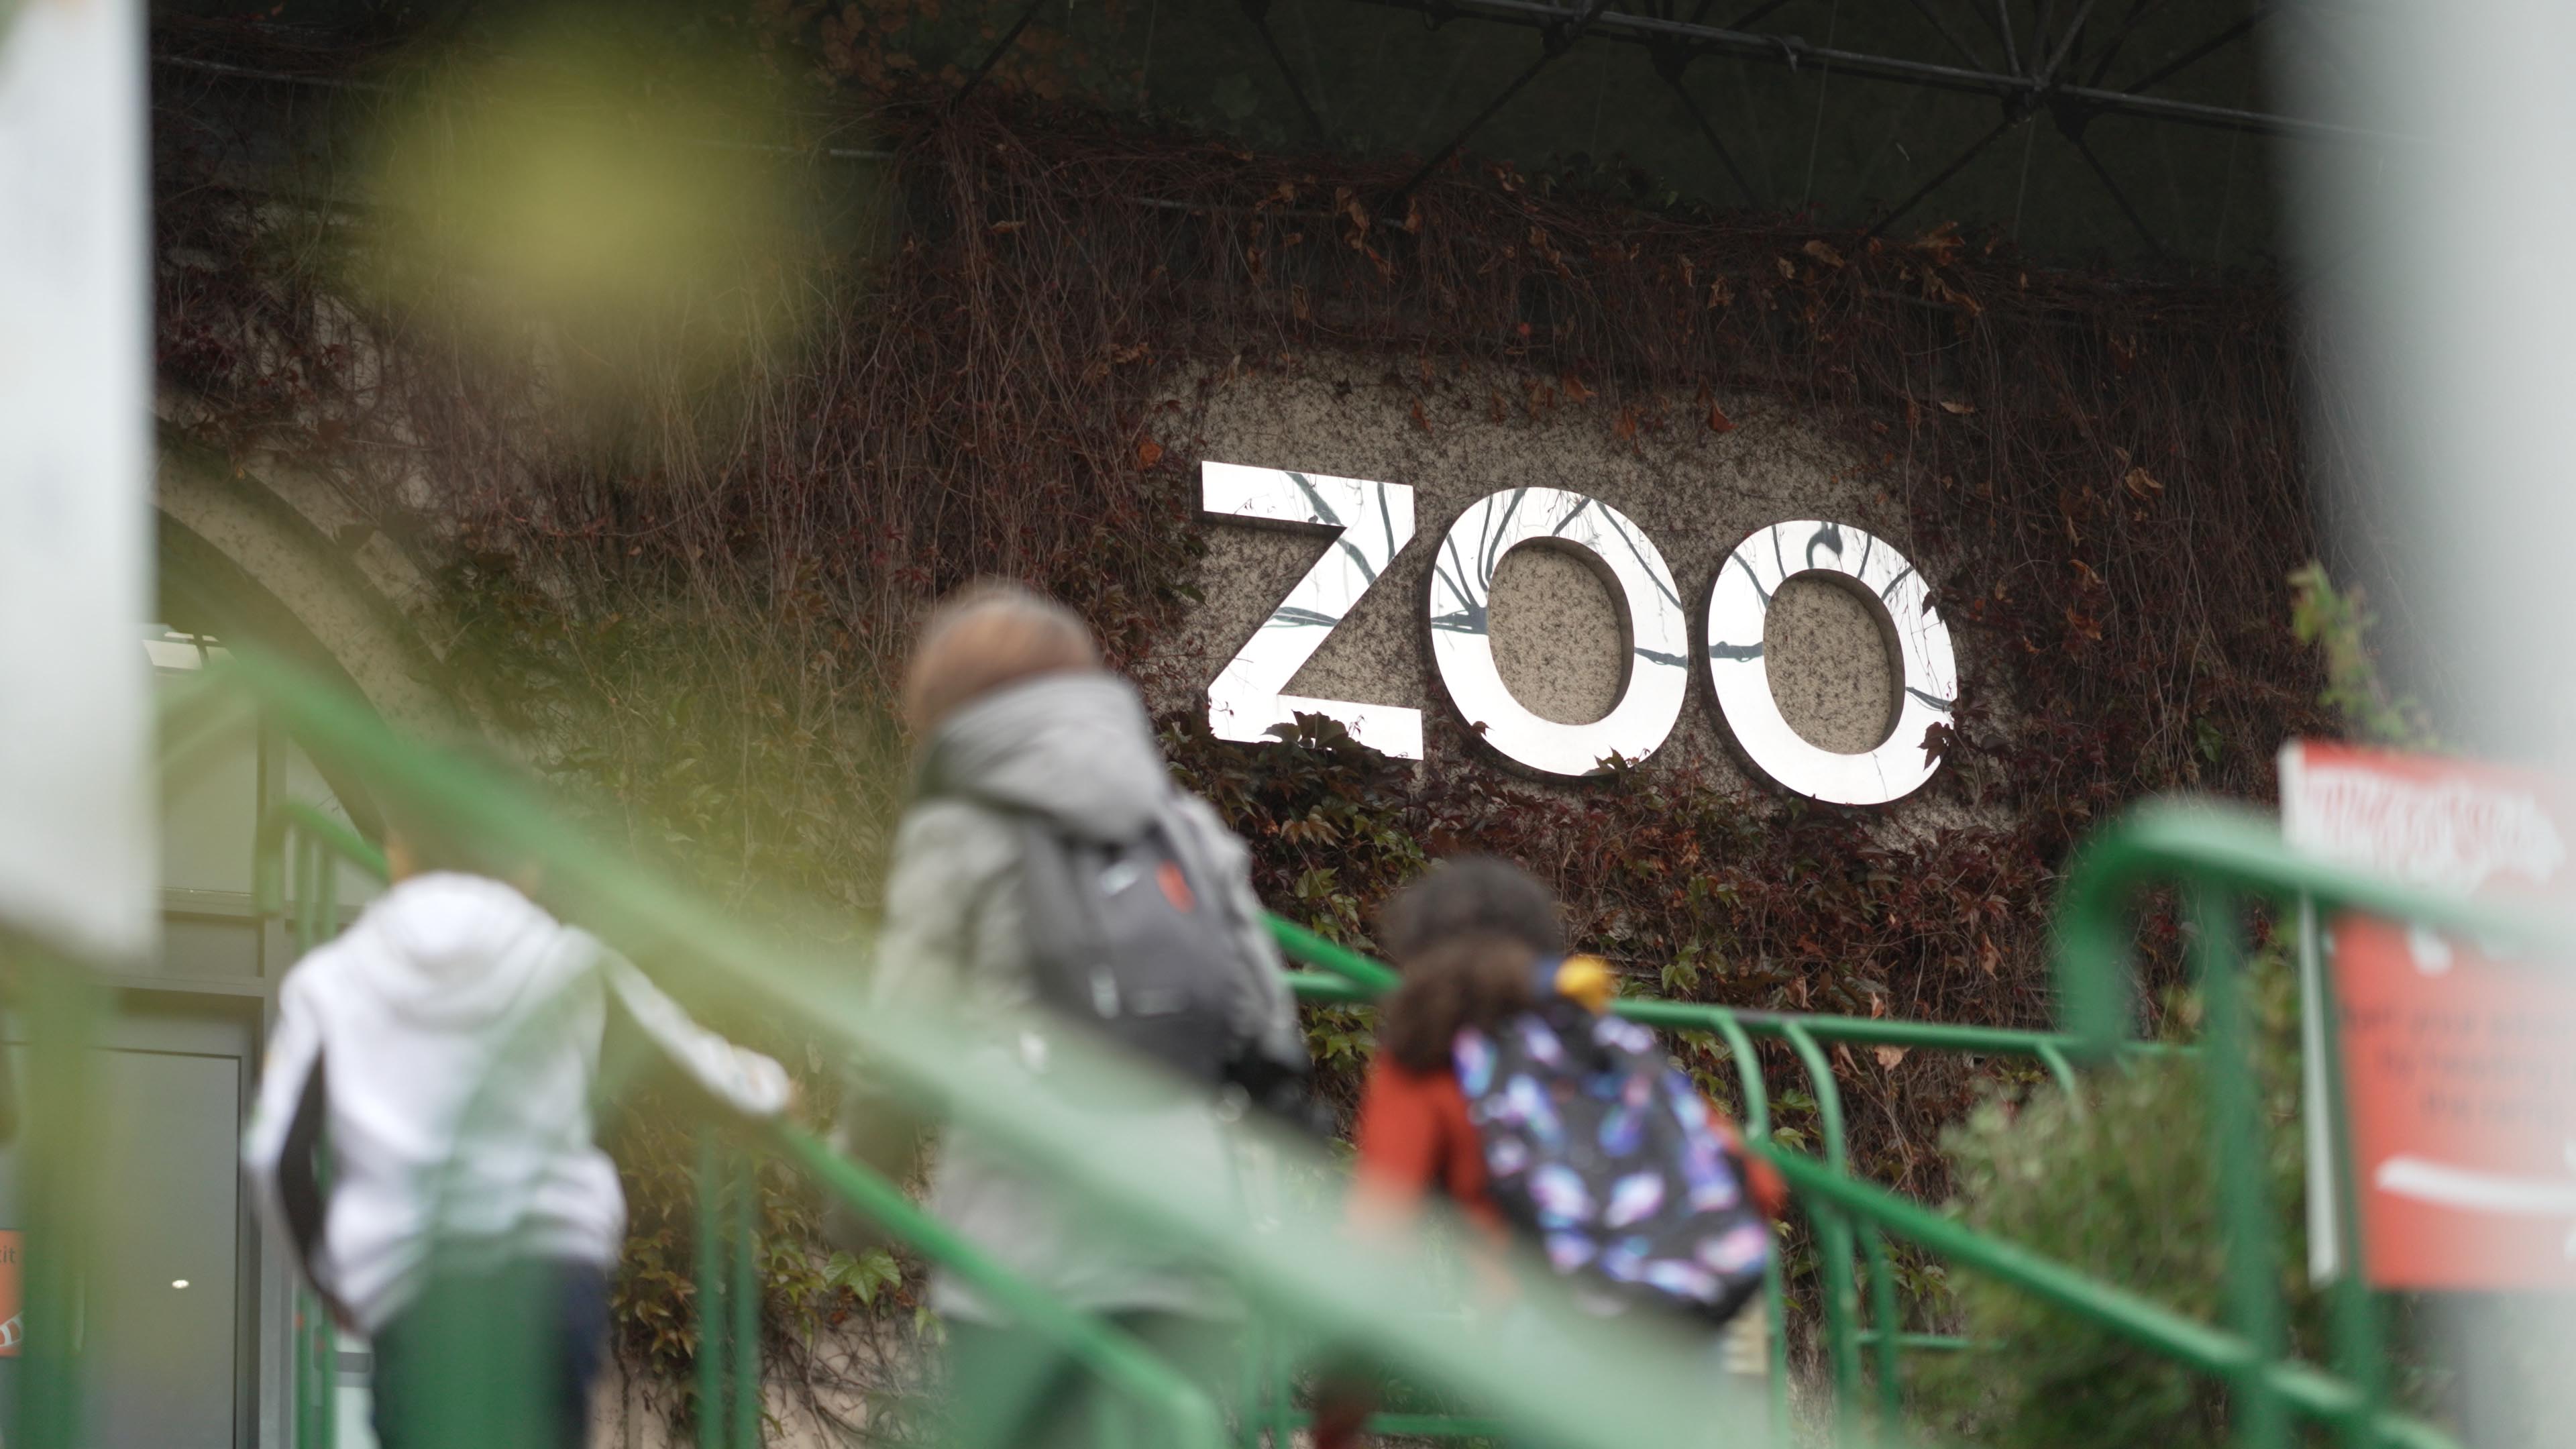 Edinburgh Zoo silver entrance sign with family in the foreground IMAGE: FoSho 2022